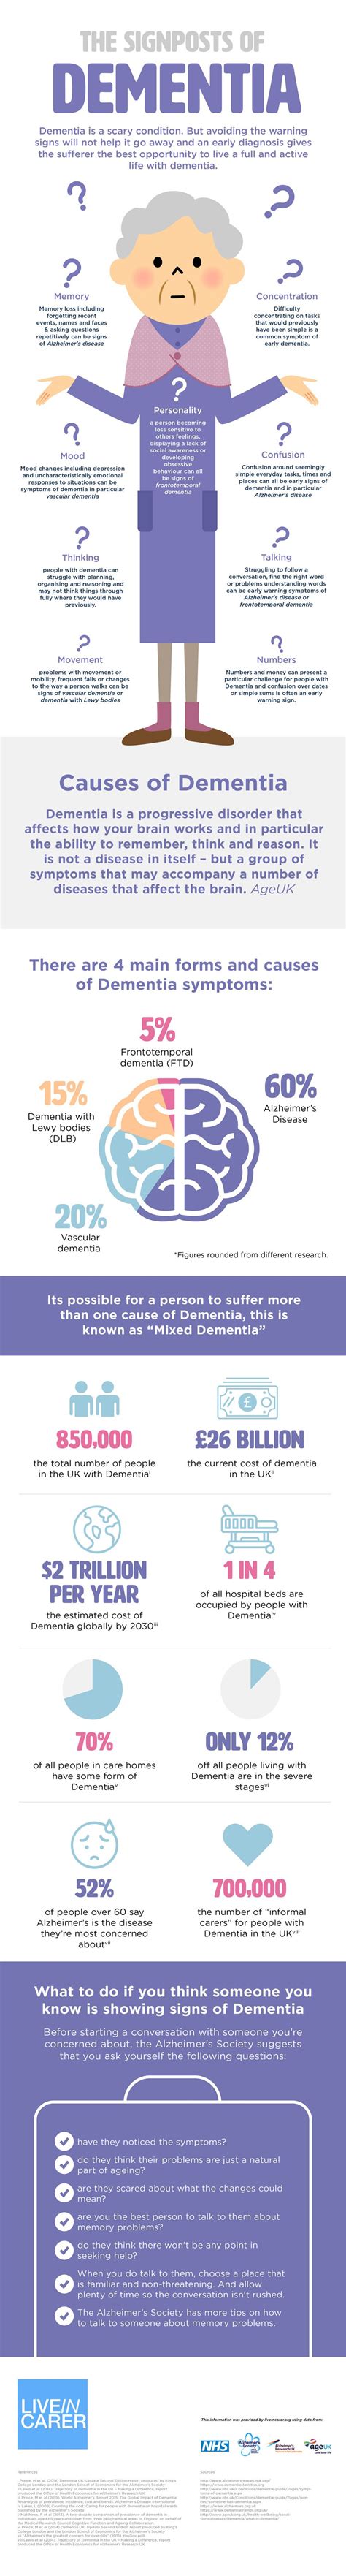 The Signs And Symptoms Of Dementia Infographic Understanding Dementia